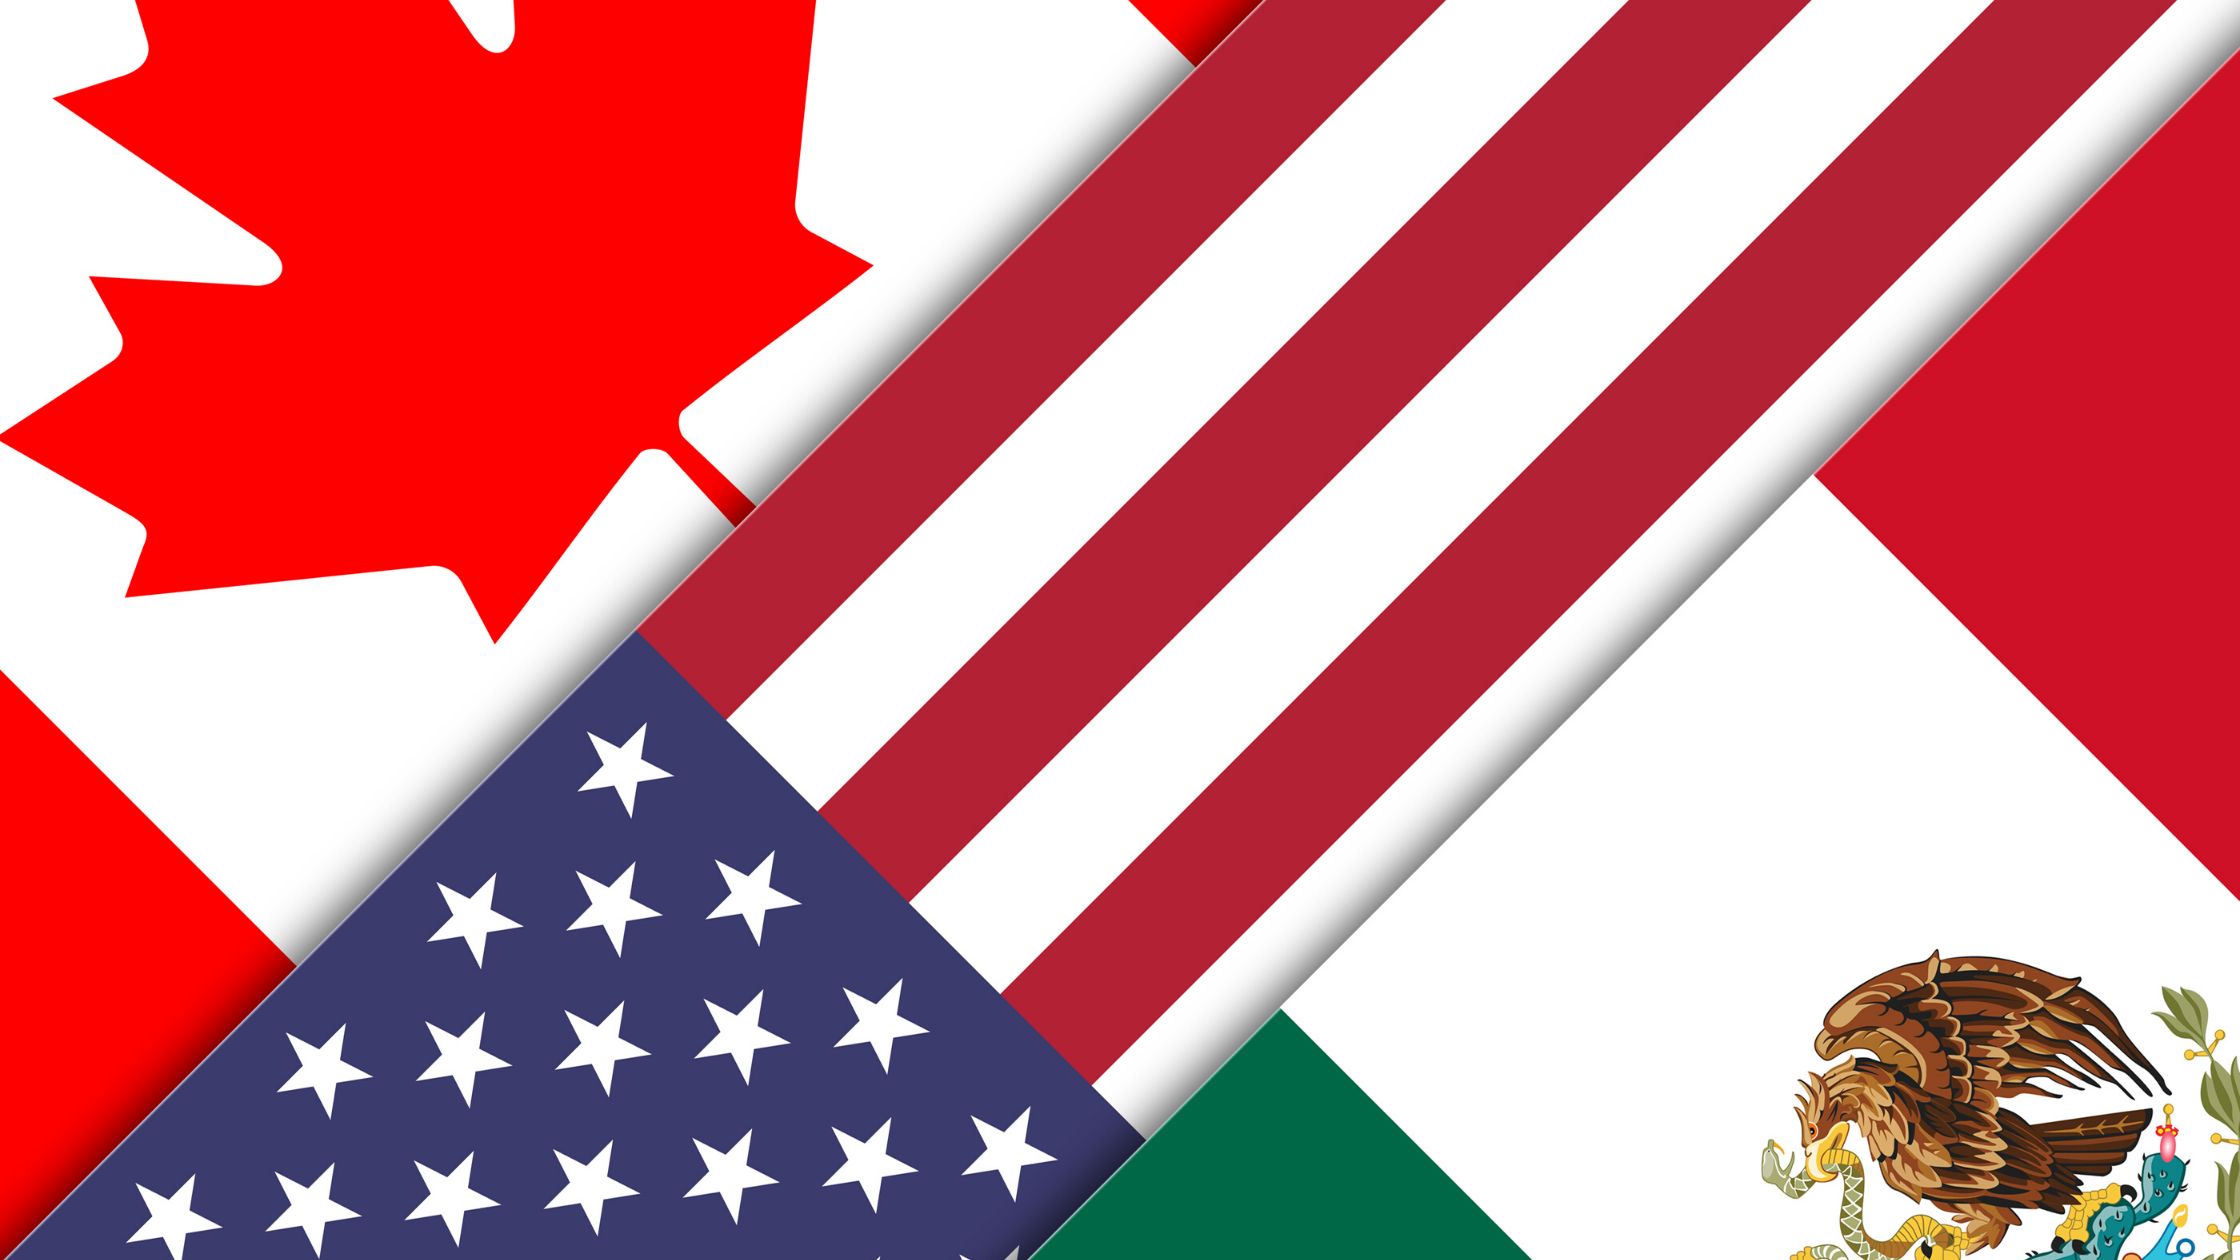 flags of CUSMA countries, USA, CANADA, and MEXICO